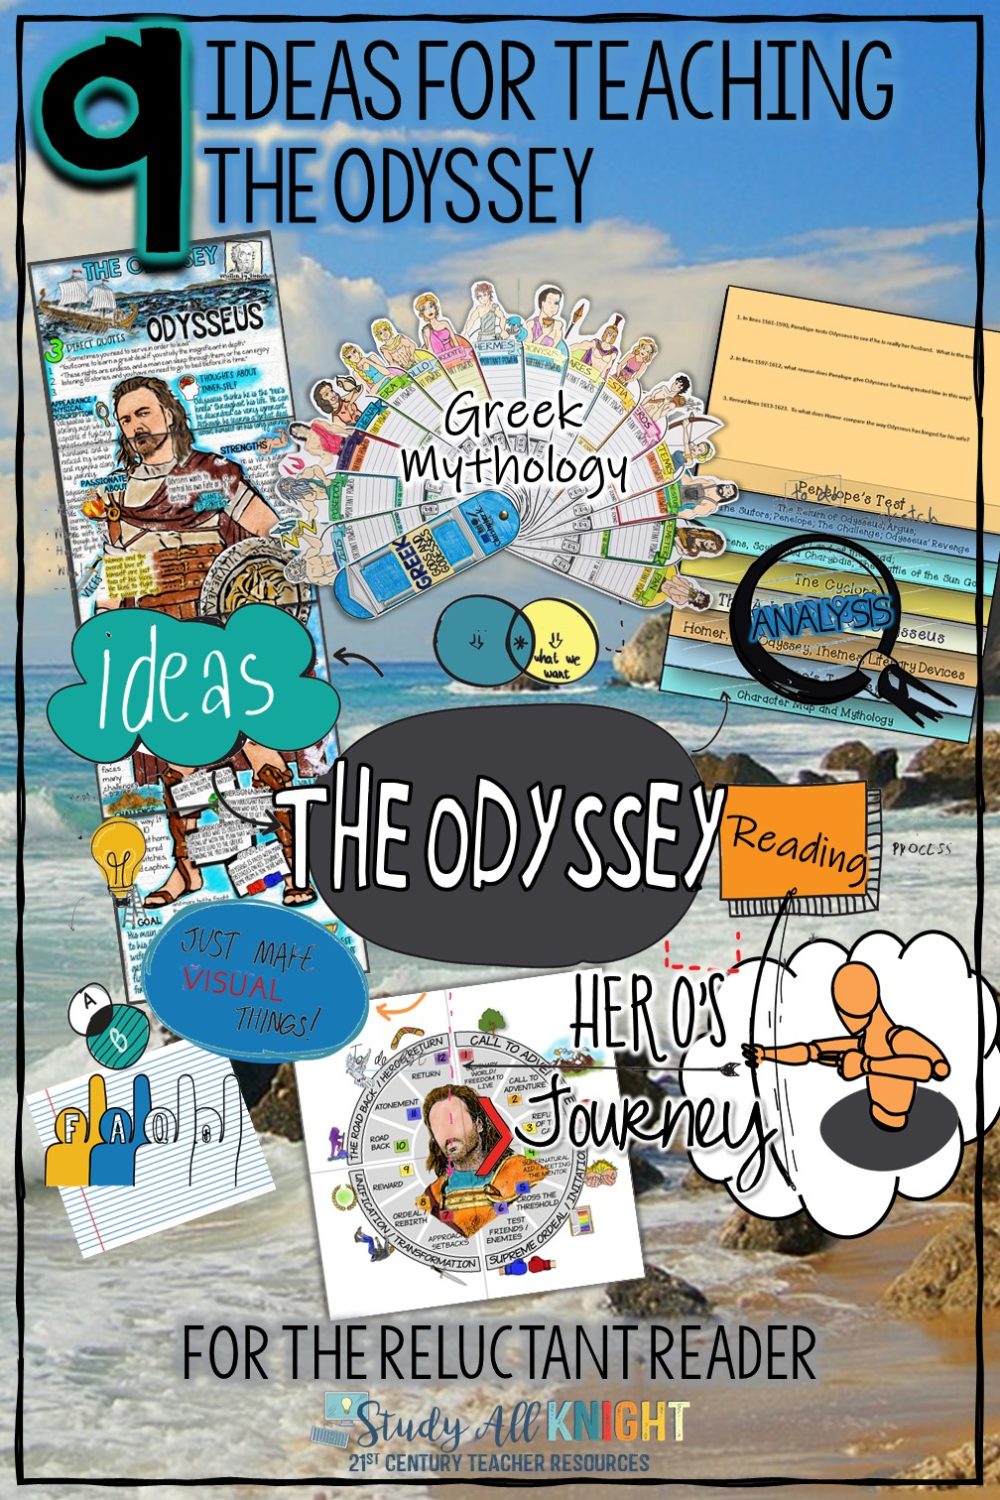 During the 8th Century, the Ancient Greek author, Homer, wrote the epic poem, The Odyssey. This poem is a crucial part of Ancient literature. Introducing The Odyssey to your students can be really hard, but I have a variety of ways to make it fun, interactive and collaborative! Not only do your students learn about this epic poem, but they also get to learn about Greek Mythology, along with famous Gods and Goddesses like Zeus, Apollo, Poseidon, Hades, Athena, and Aphrodite! 9 Lesson Ideas For Teaching The Odyssey, is loaded with hands-on and modern activities for teachers, and tips to use in their English Language arts classrooms. If you are teaching The Odyssey or looking for resources, look no further! A Greek Mythology mini-unit is a way to kick off your epic poem unit and onto the hero's journey! #theodyssey #teachertips #highschoolenglish #middleschoolela #herosjourney #teachers  